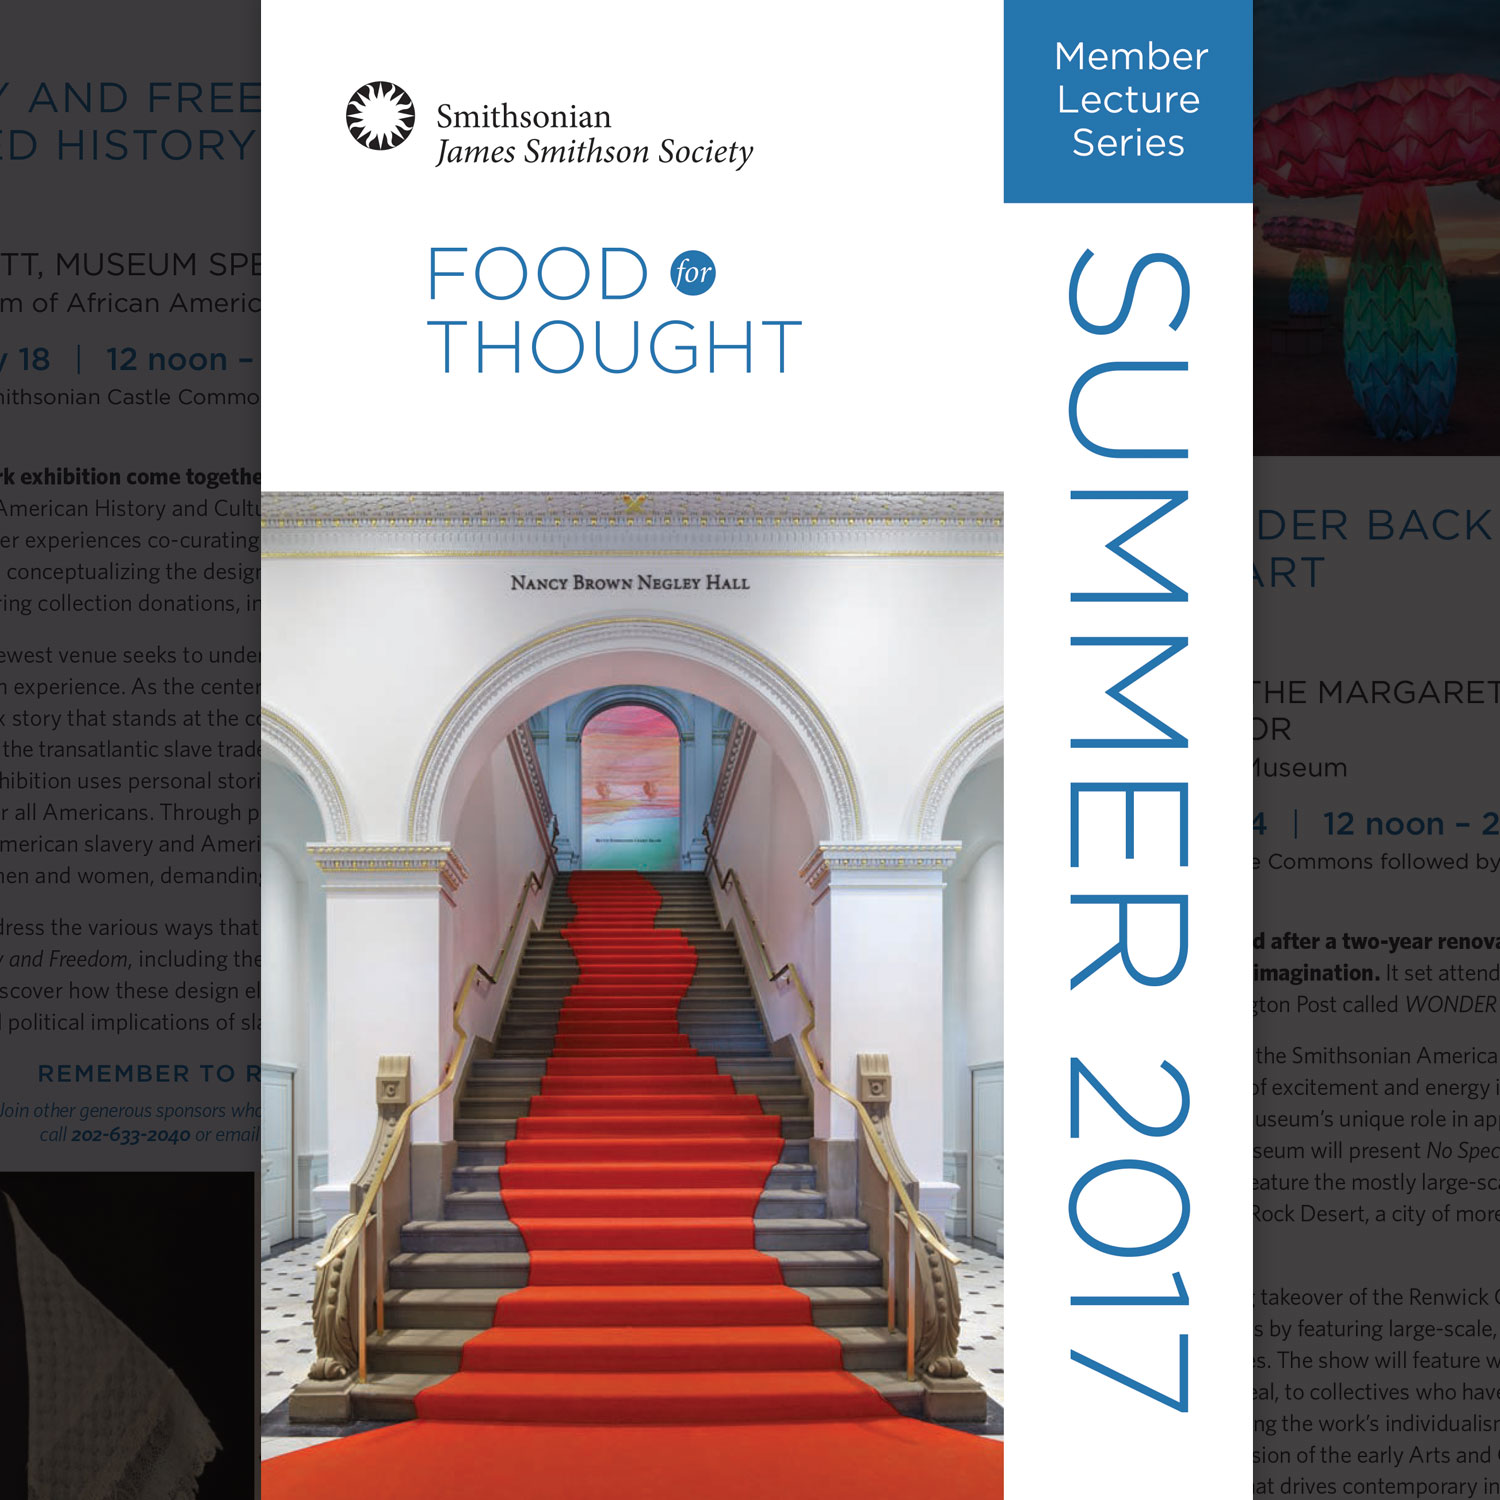   Food for Thought  – Event Invitation 